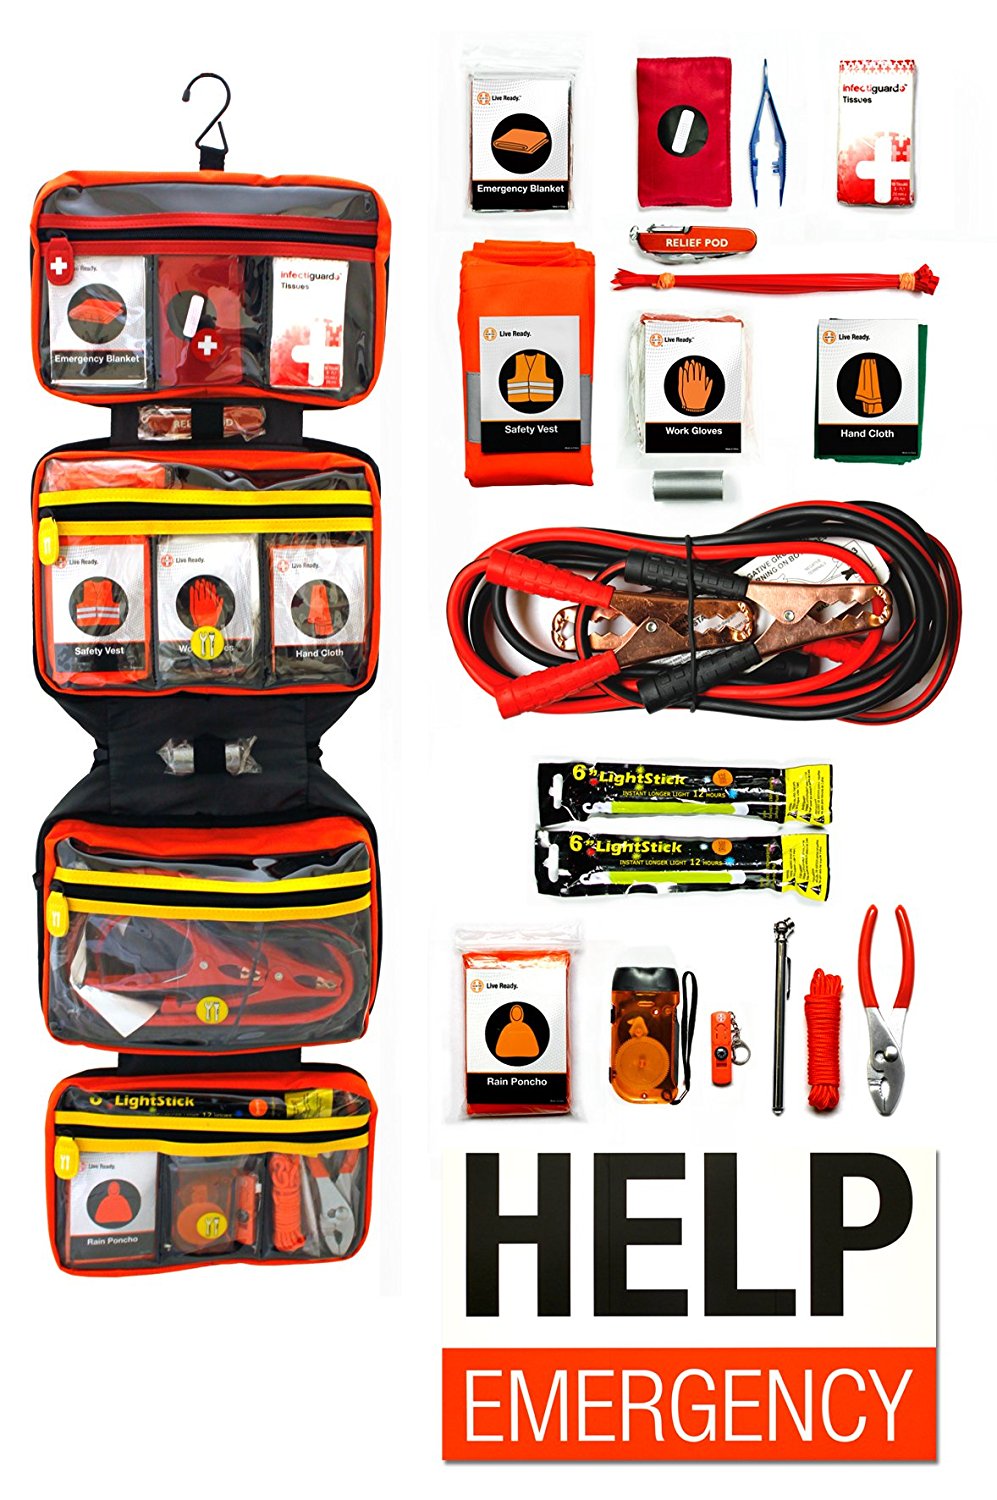 Today only: Relief Pod Orange roadside emergency kit for $33